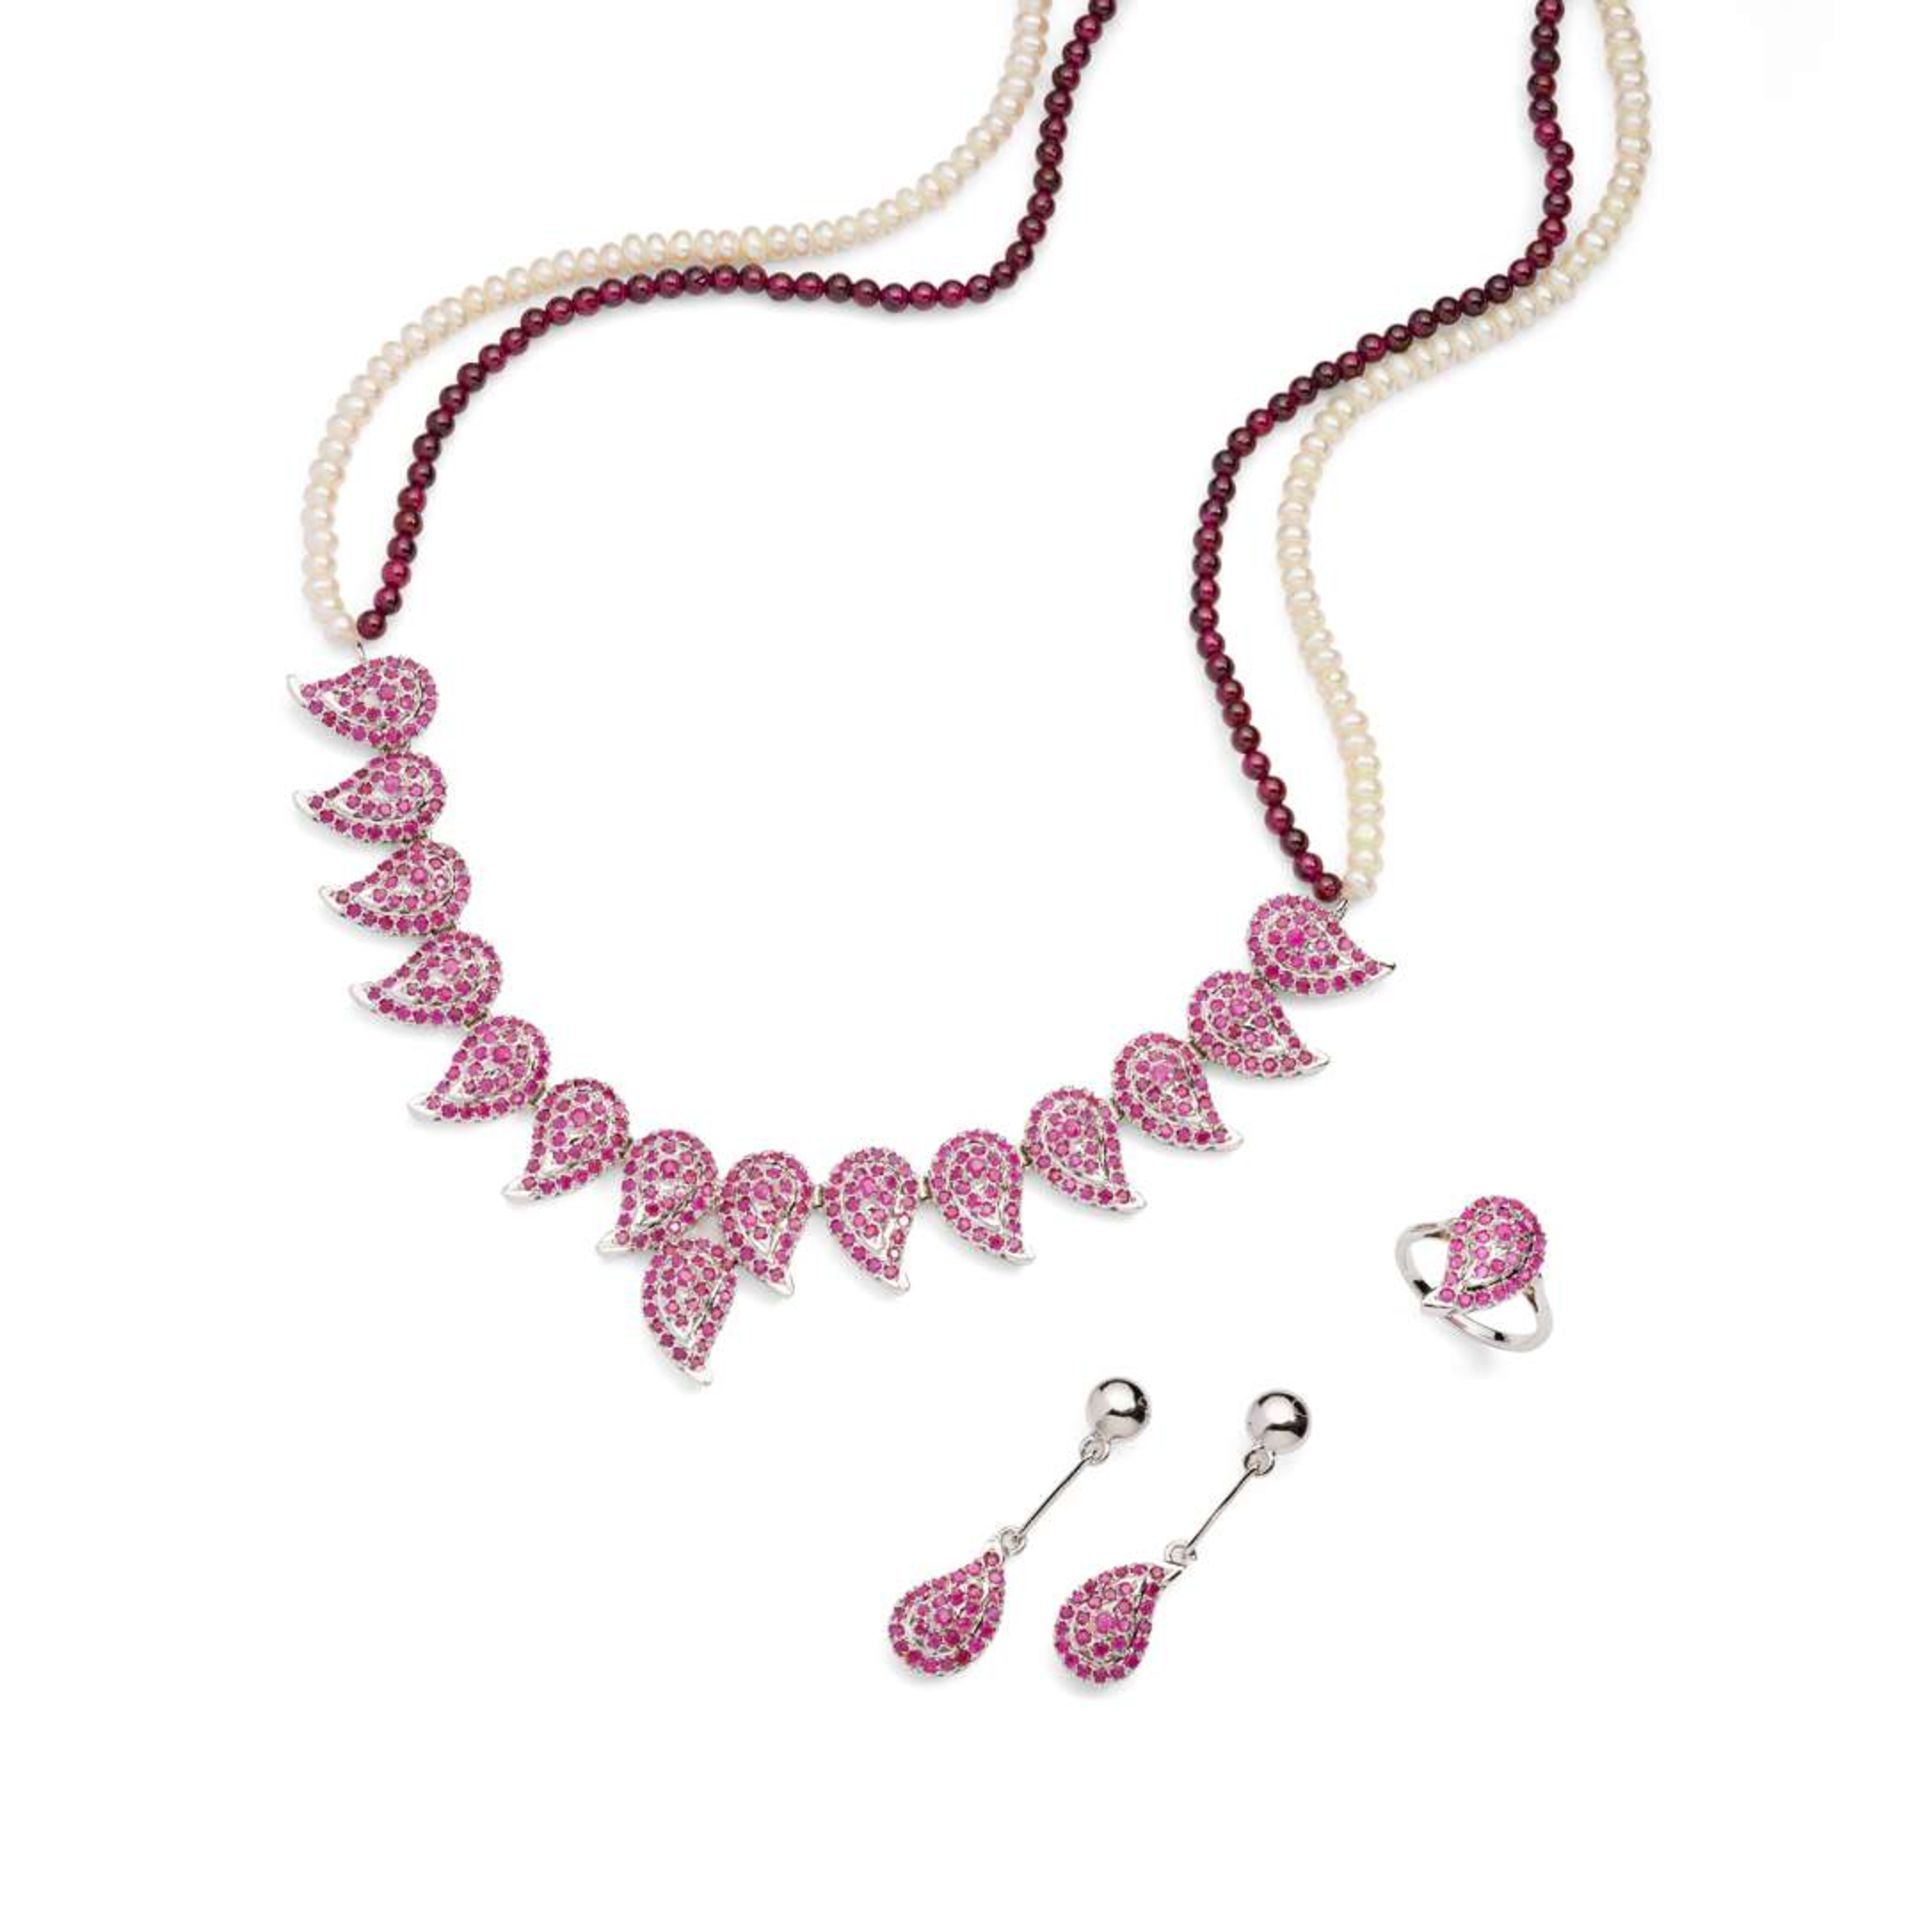 A part-suite of Indian style ruby and pearl jewellery